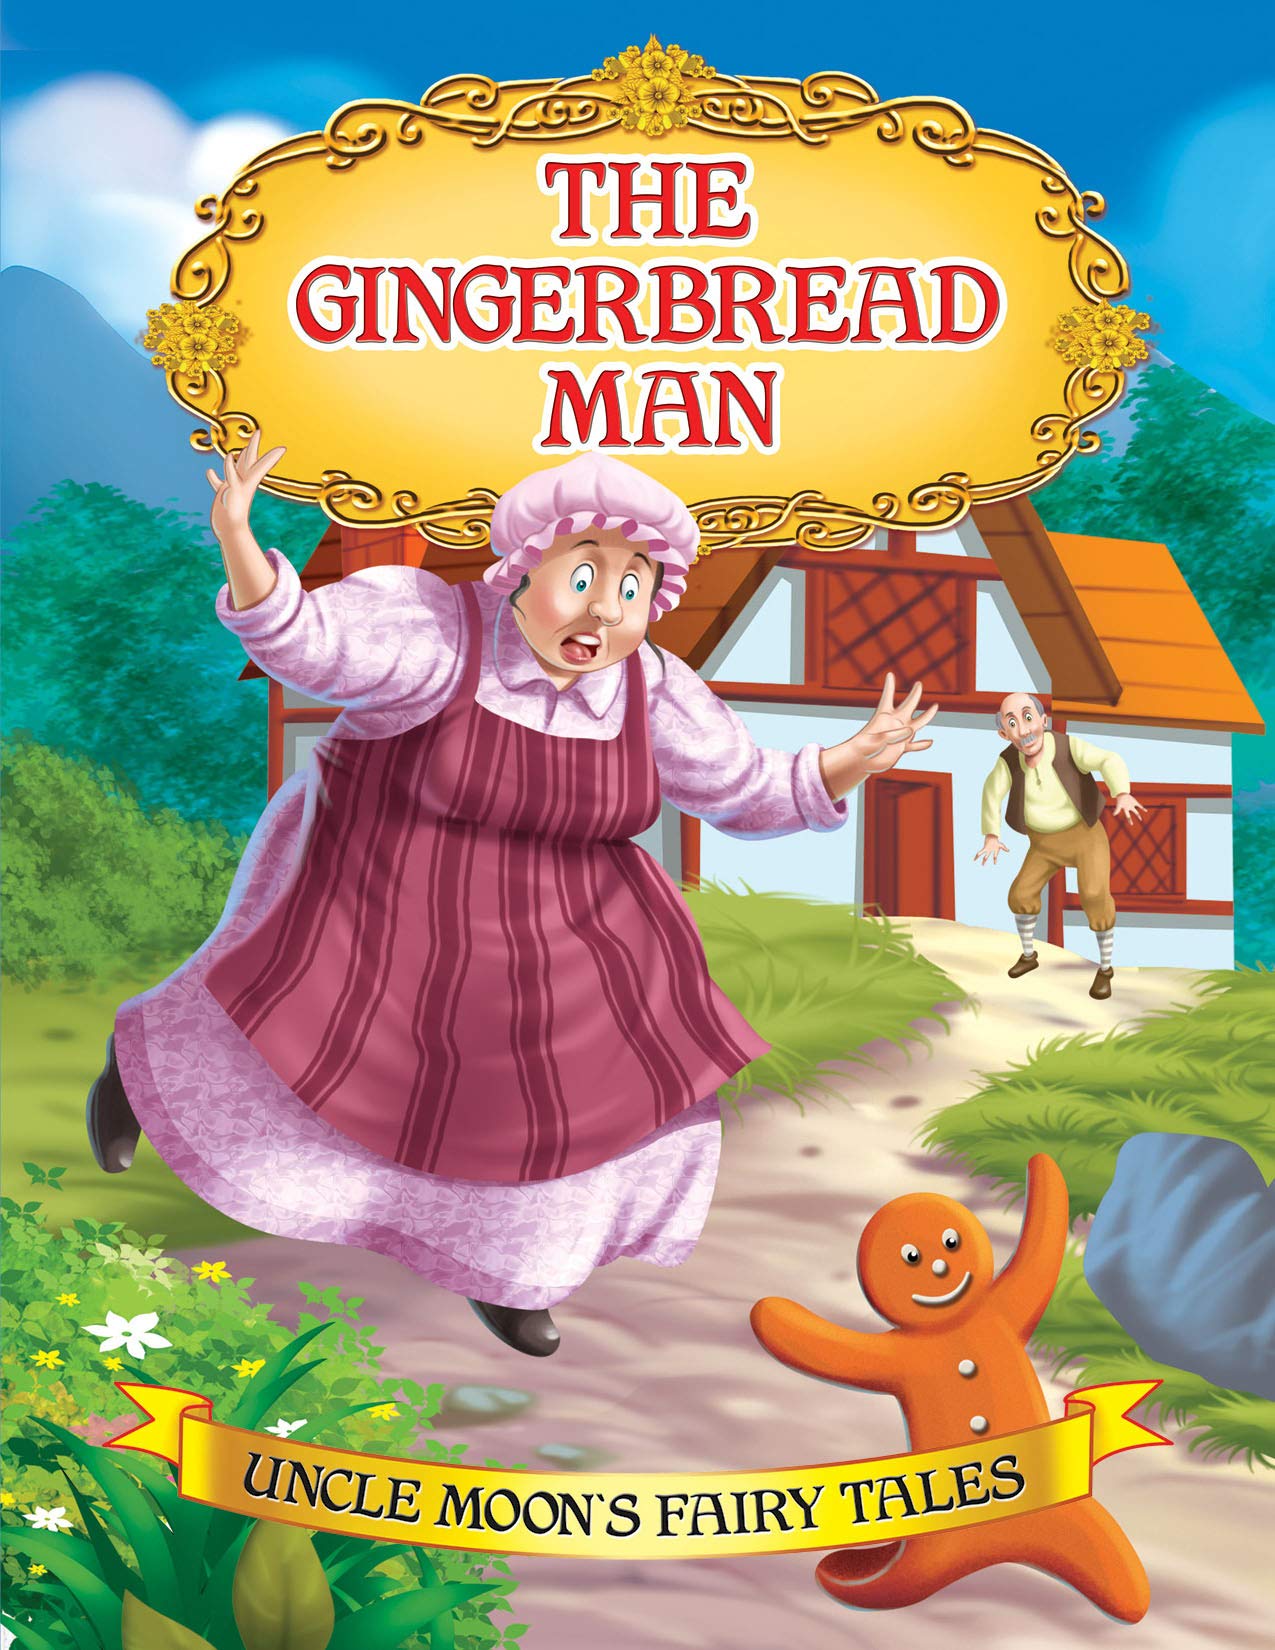 (Uncle Moon's Fairy Tales) The Gingerbread Man